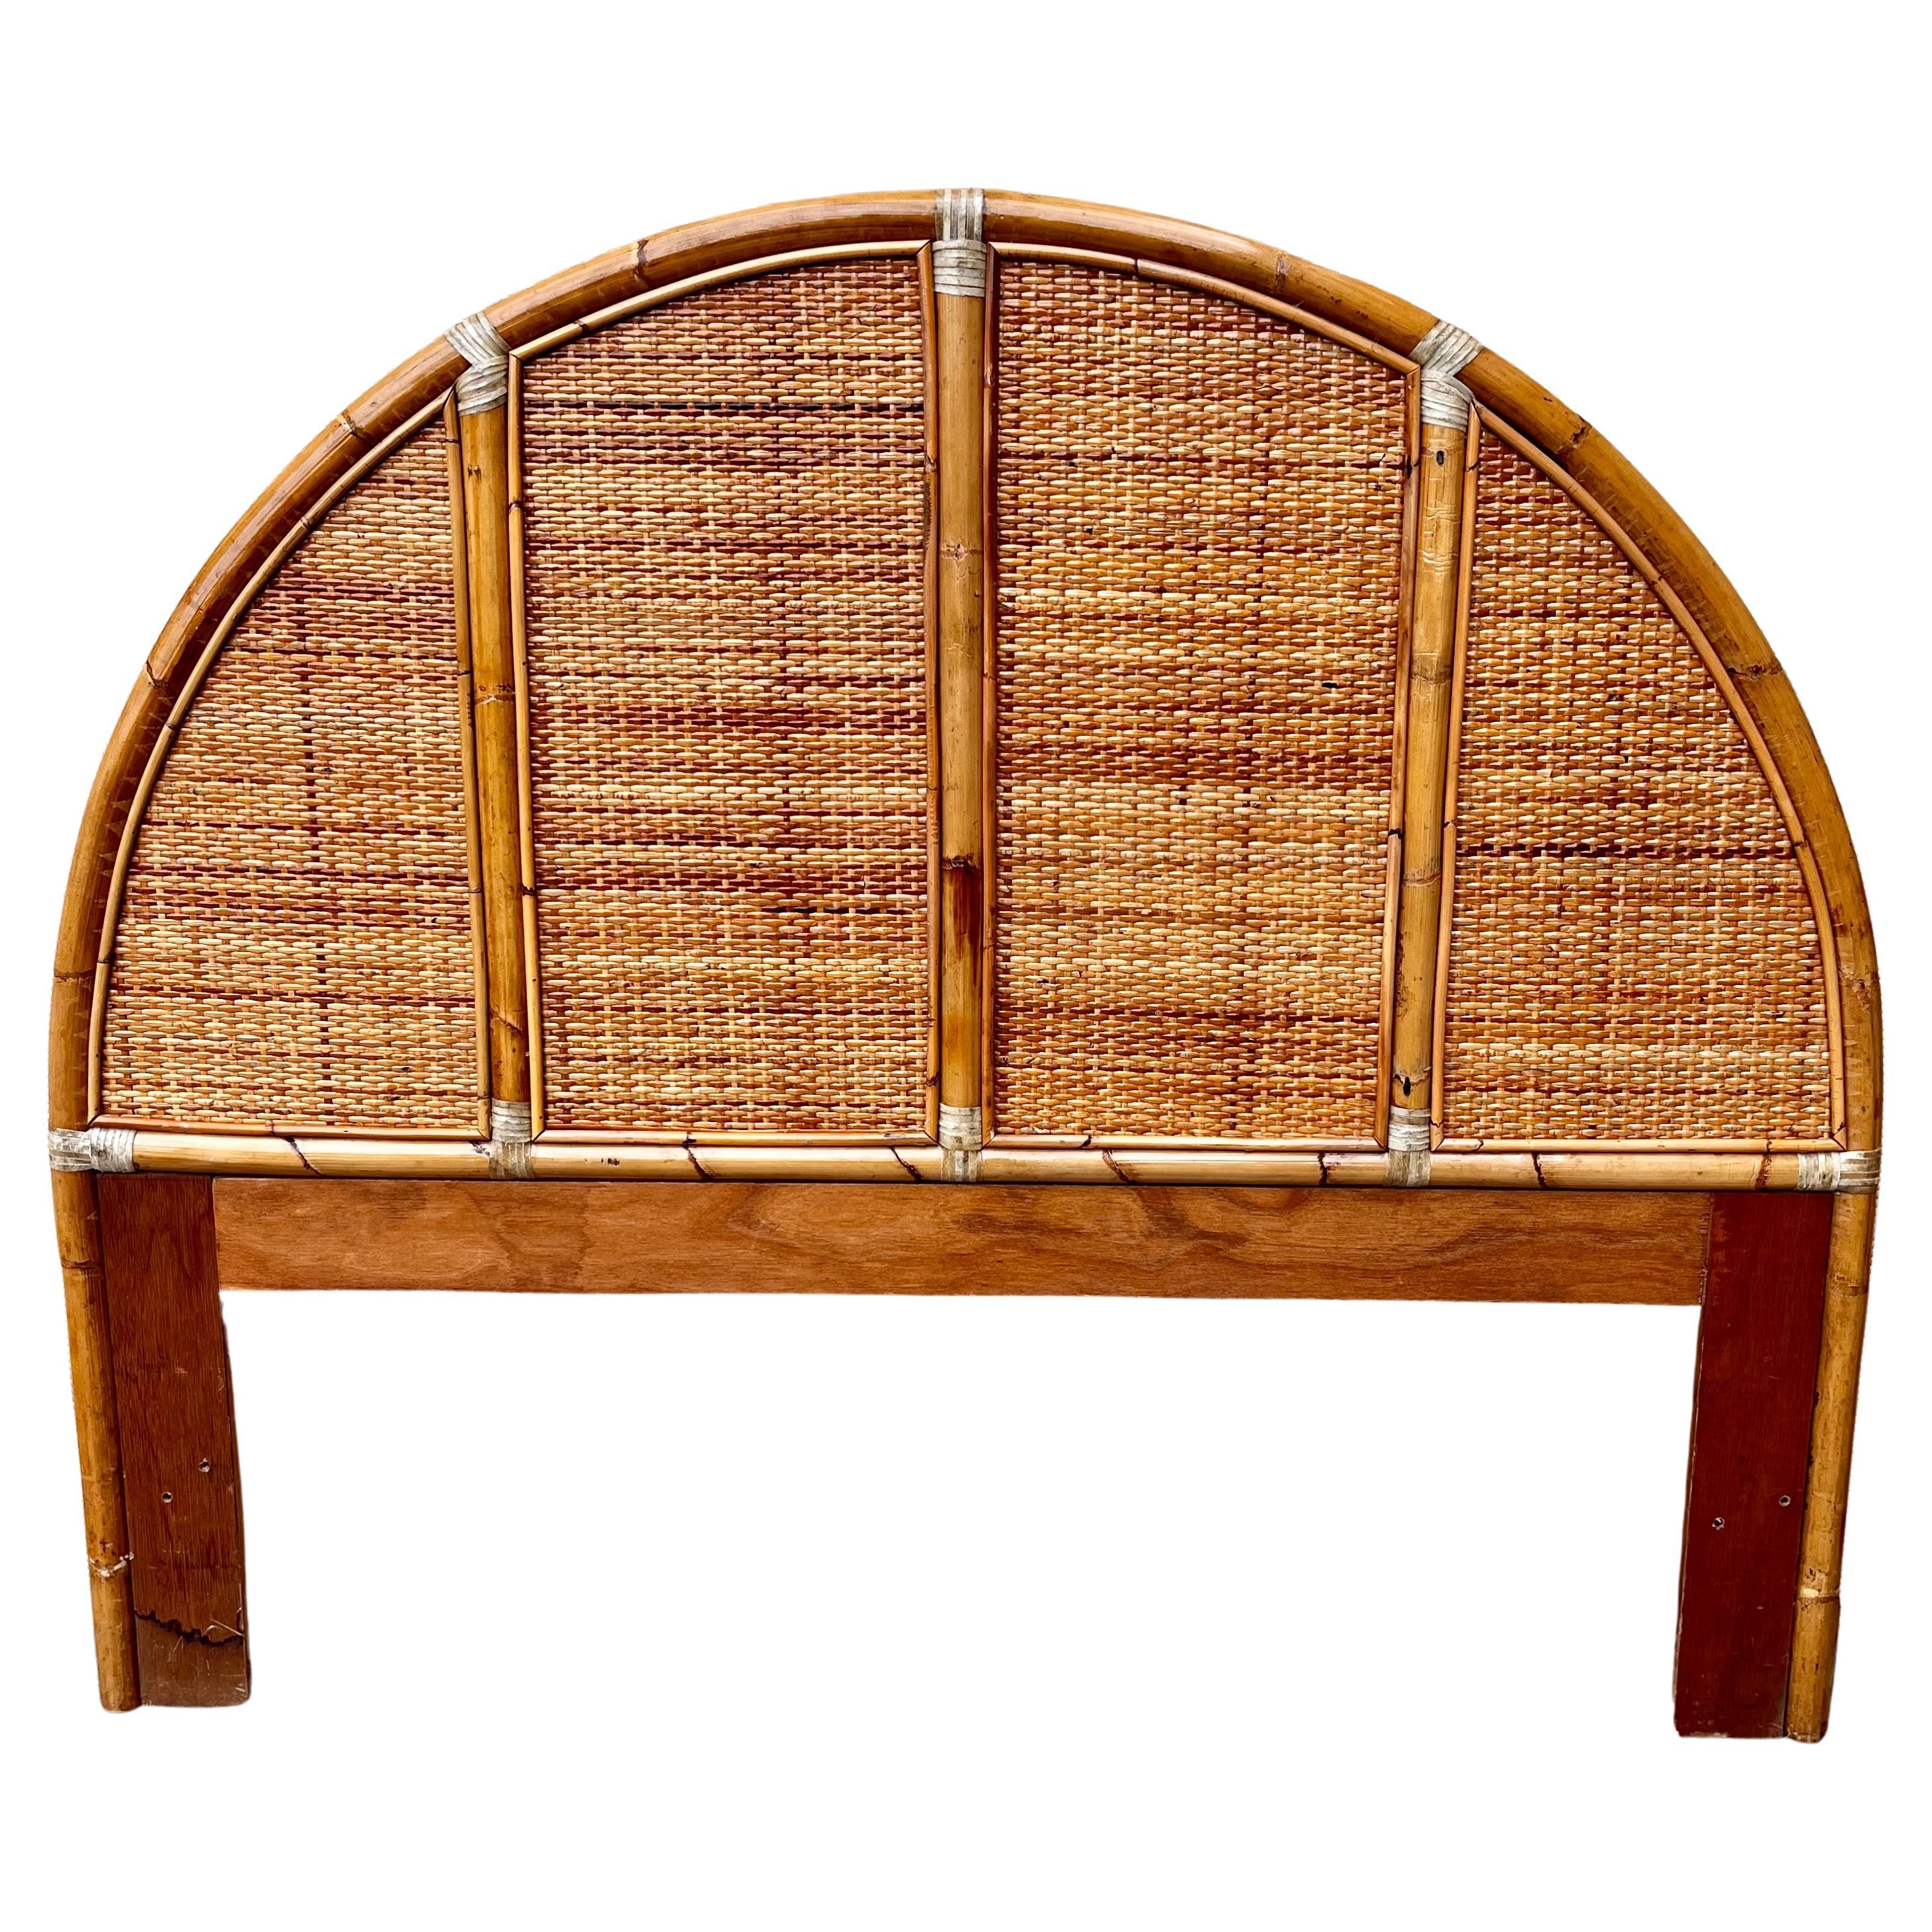 Vintage Coastal Style Arched Rattan Queen Headboard in the McGuire's Style